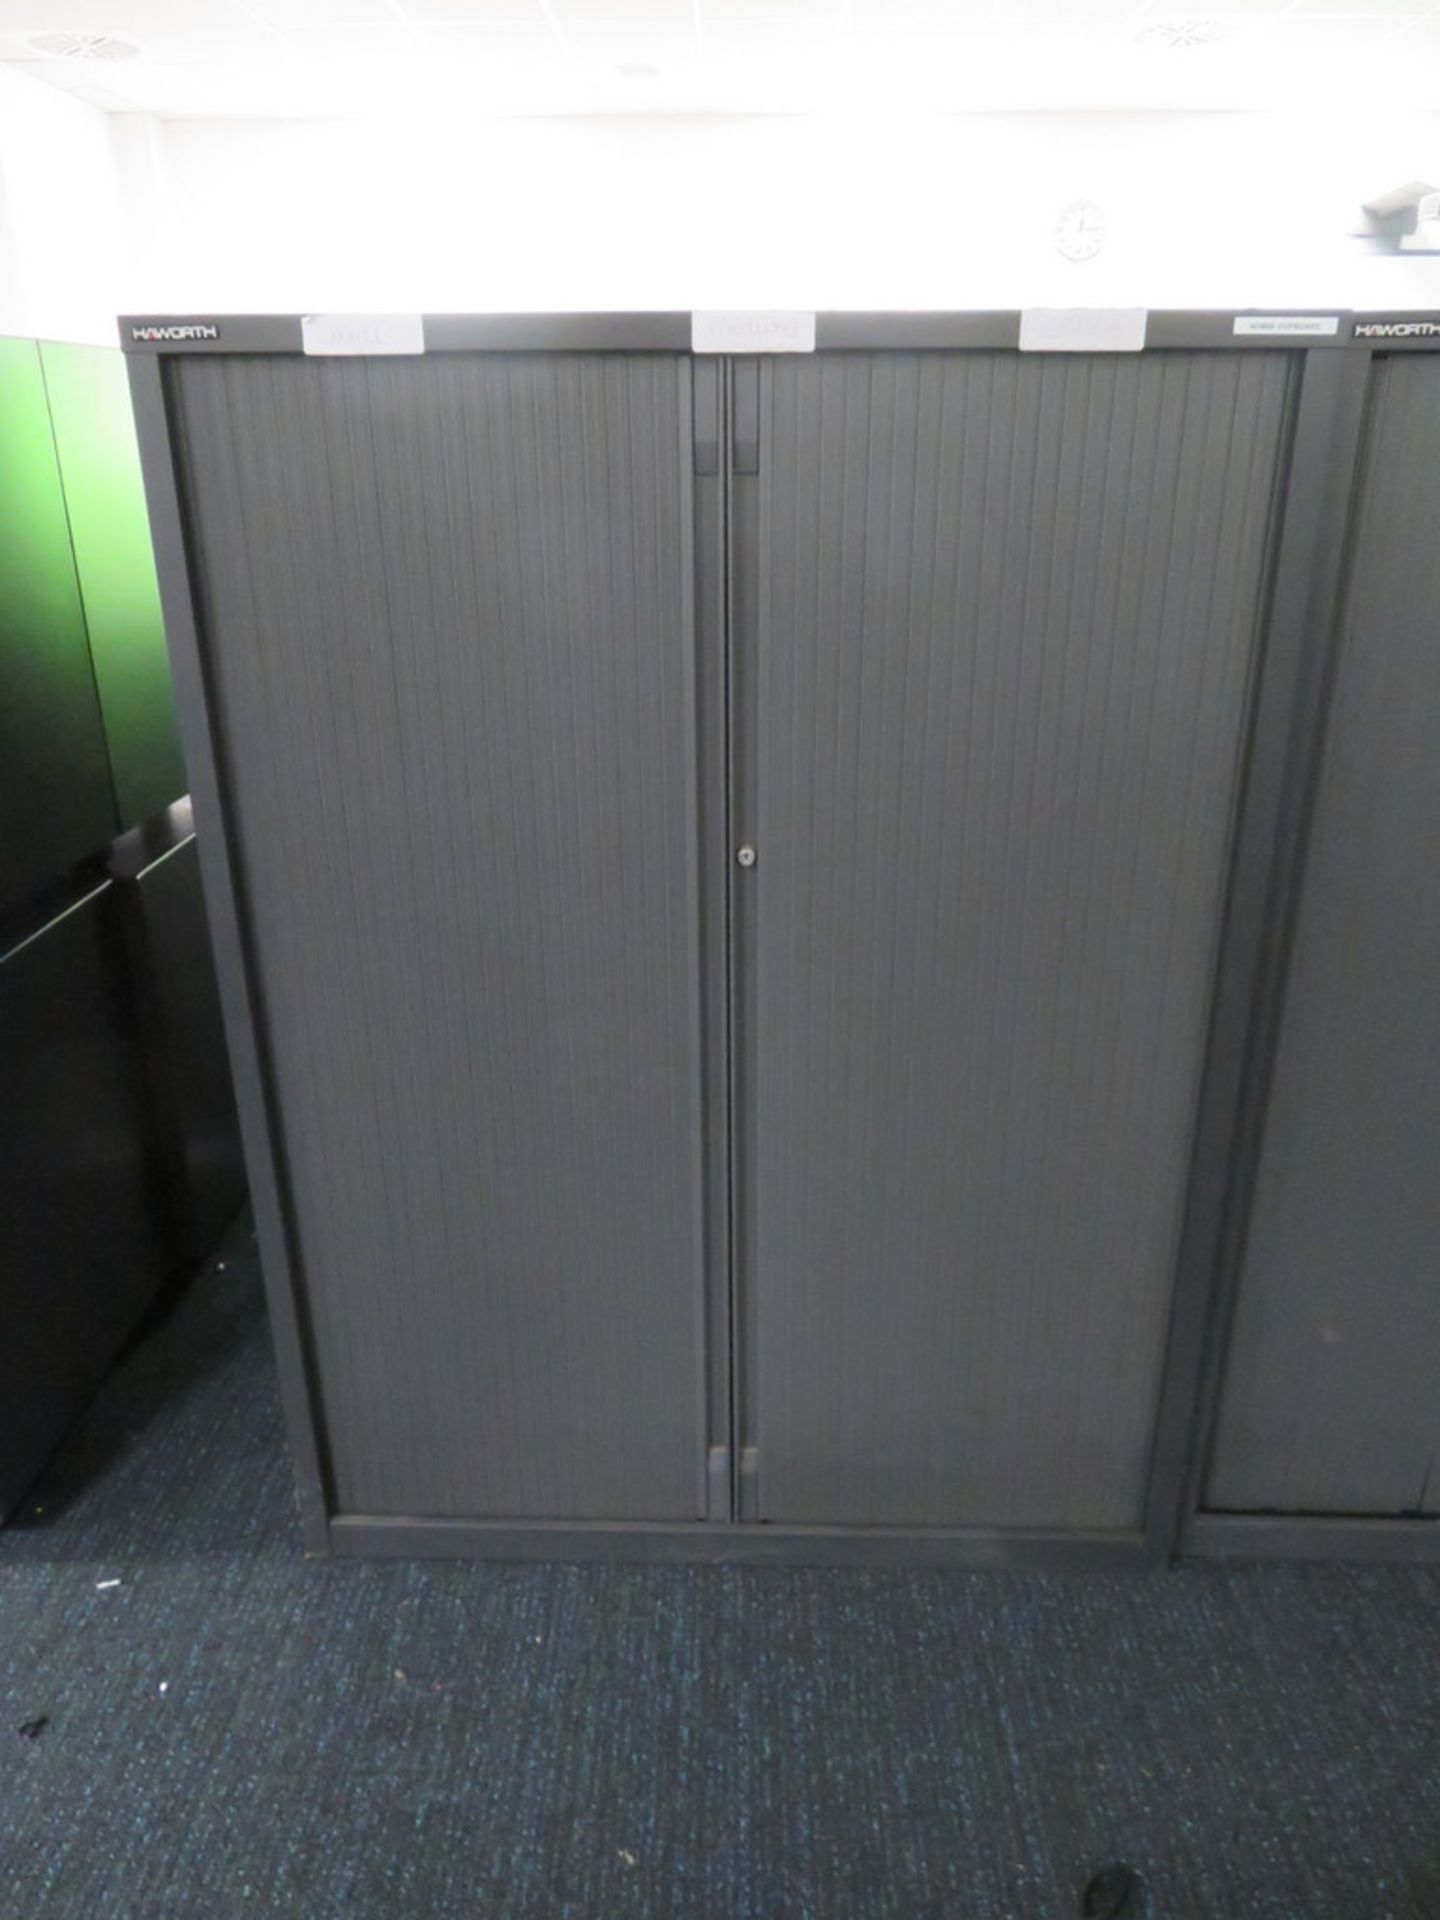 3x Howarth Tambour Office Storage Cabinet. - Image 2 of 3